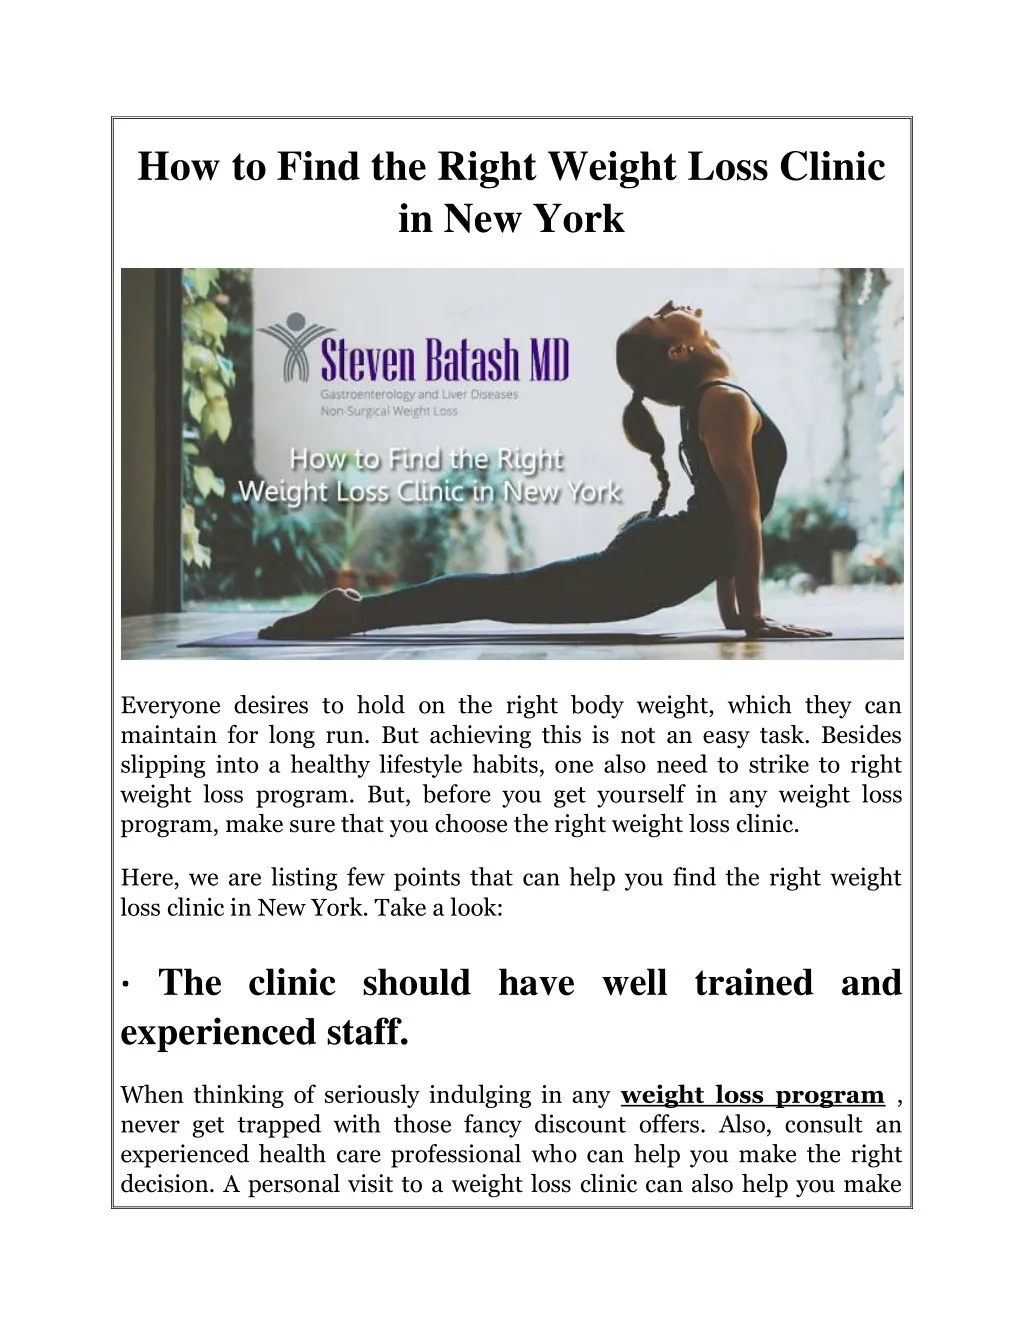 how to find the right weight loss clinic